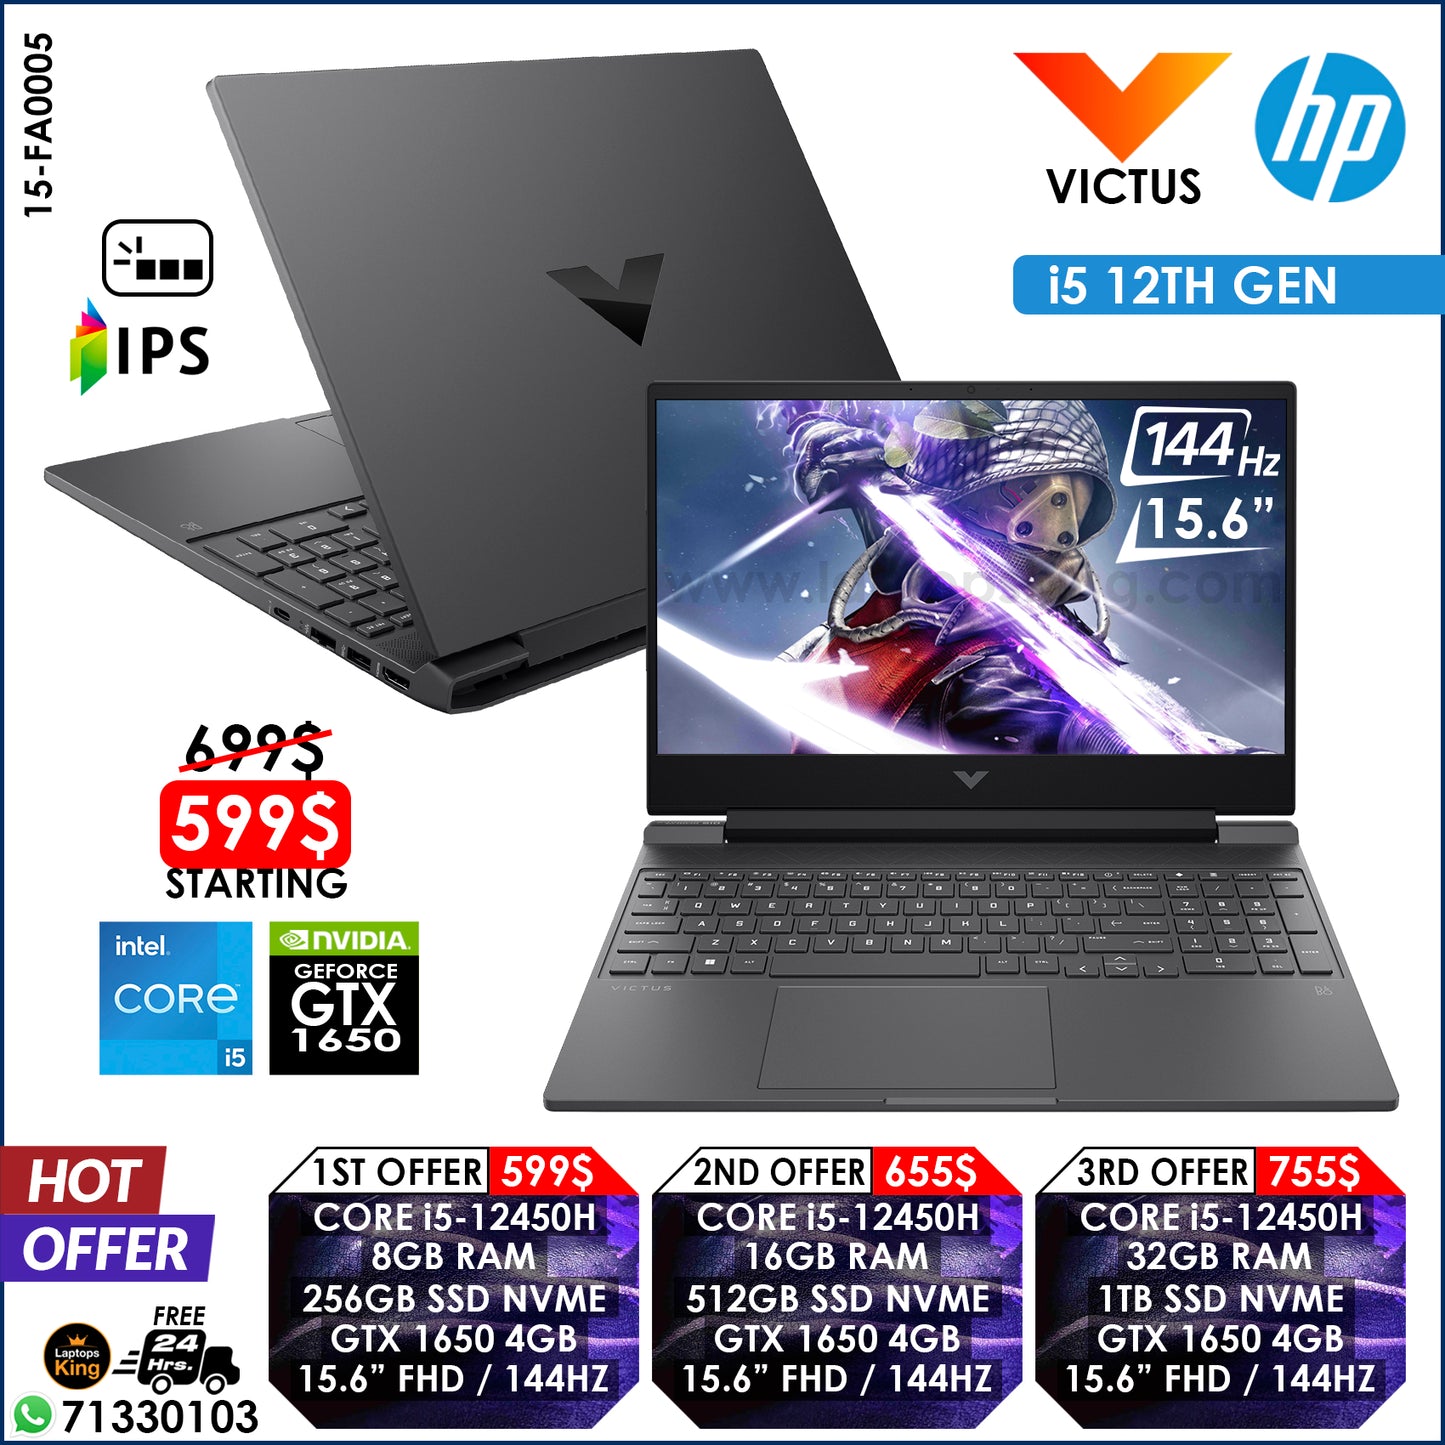 HP Victus 15-FA0005 Core i5-12450H Gtx 1650 144Hz Gaming Laptop Offers (New OB)